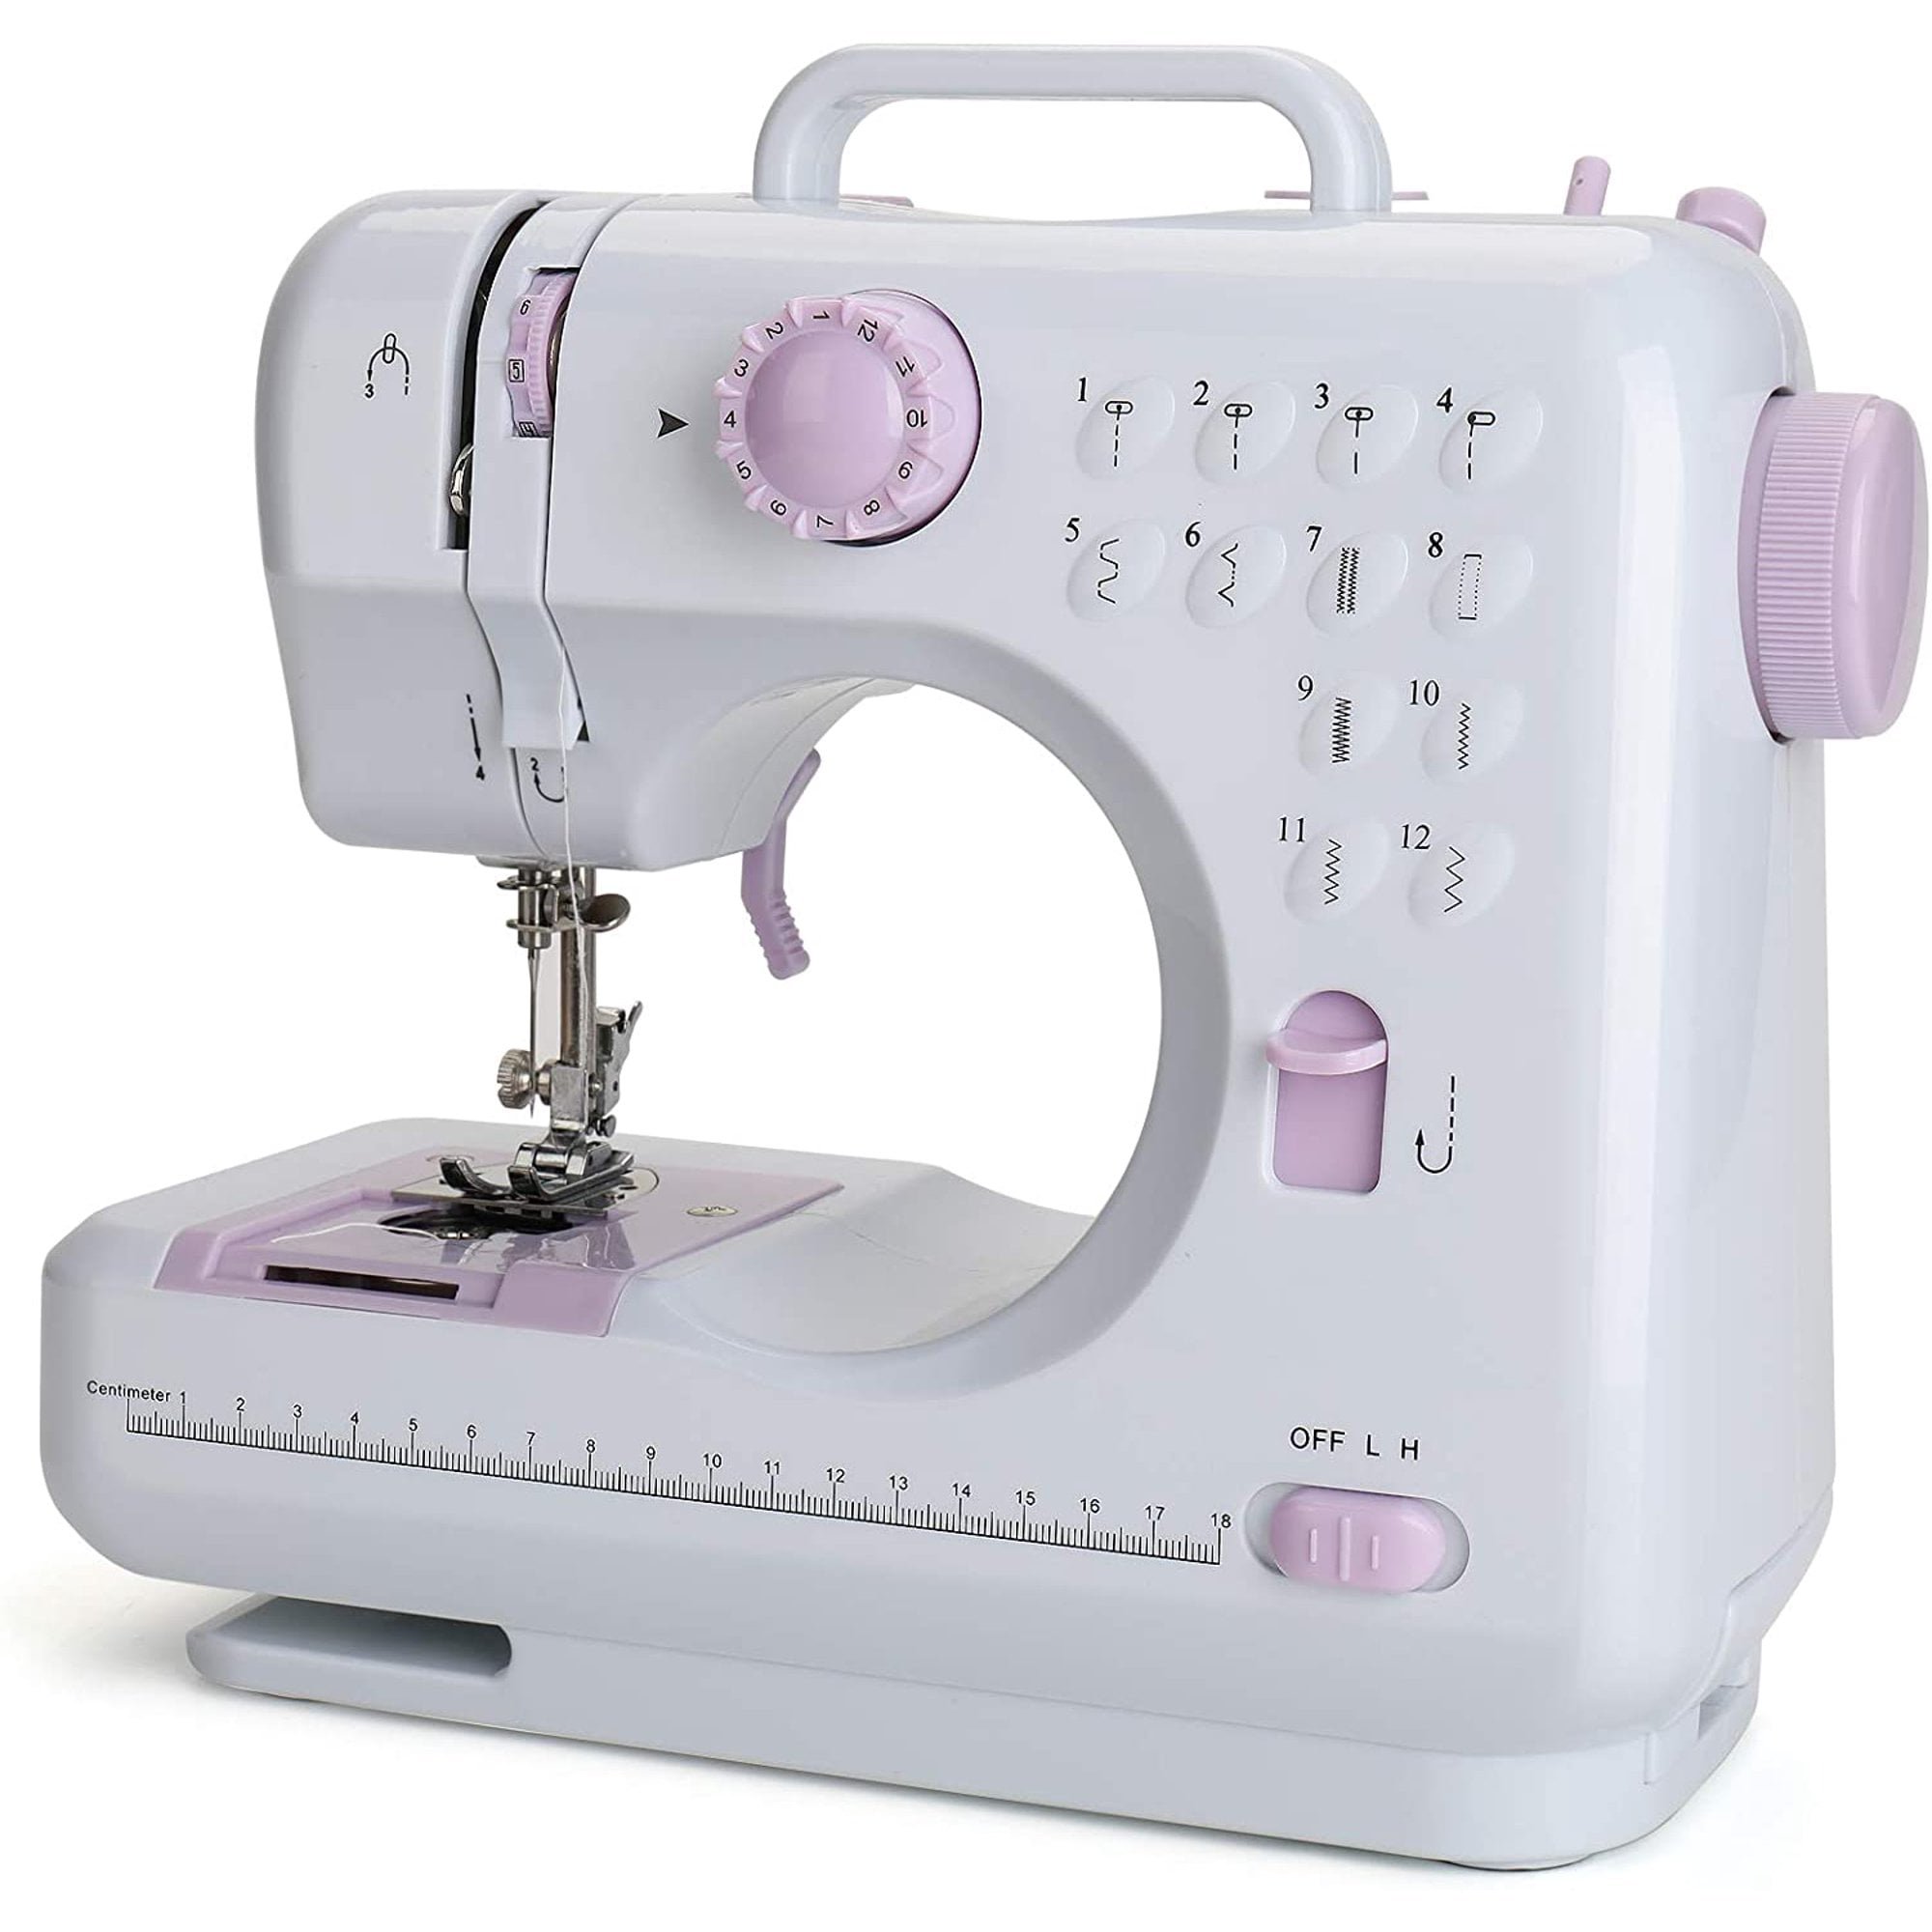 SOLUTION! How to Use Mini Sewing Machine China